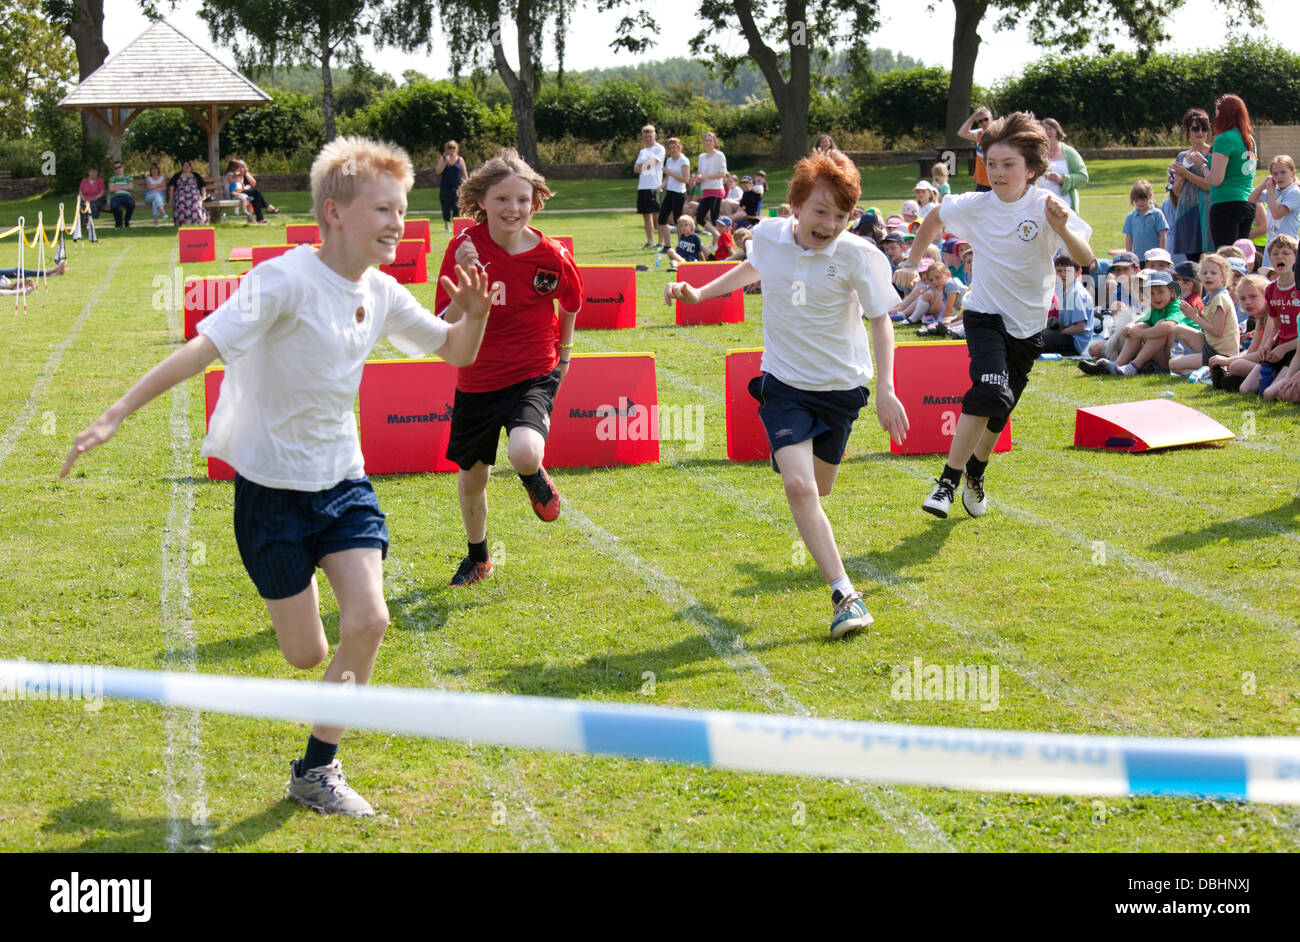 Boys competing in sprint race on school sports day Chipping Campden UK Stock Photo